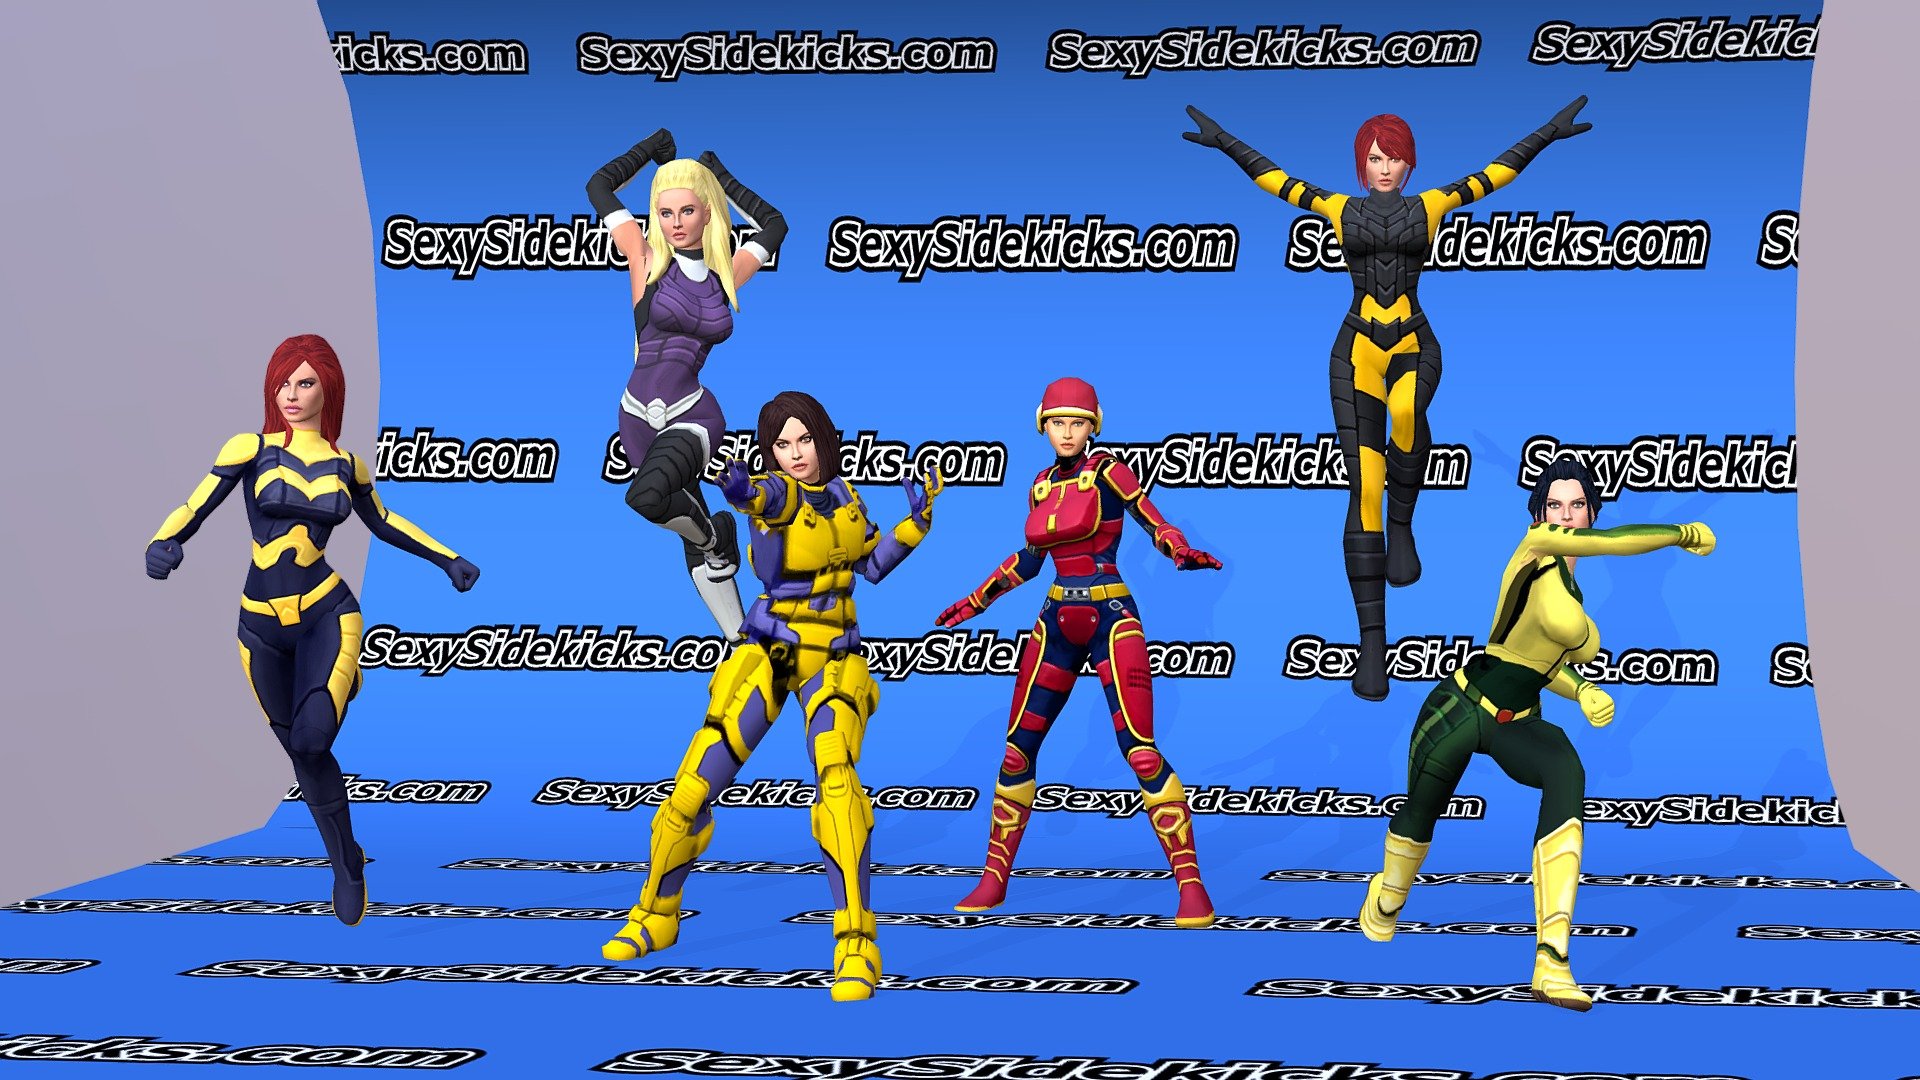 This is just the Future Females 1-6, includes the basefiles and textures

The Full Superhero Construction Kit is here - The Superhero Construction Kit Future Females1-6 - Buy Royalty Free 3D model by rungy 3d model